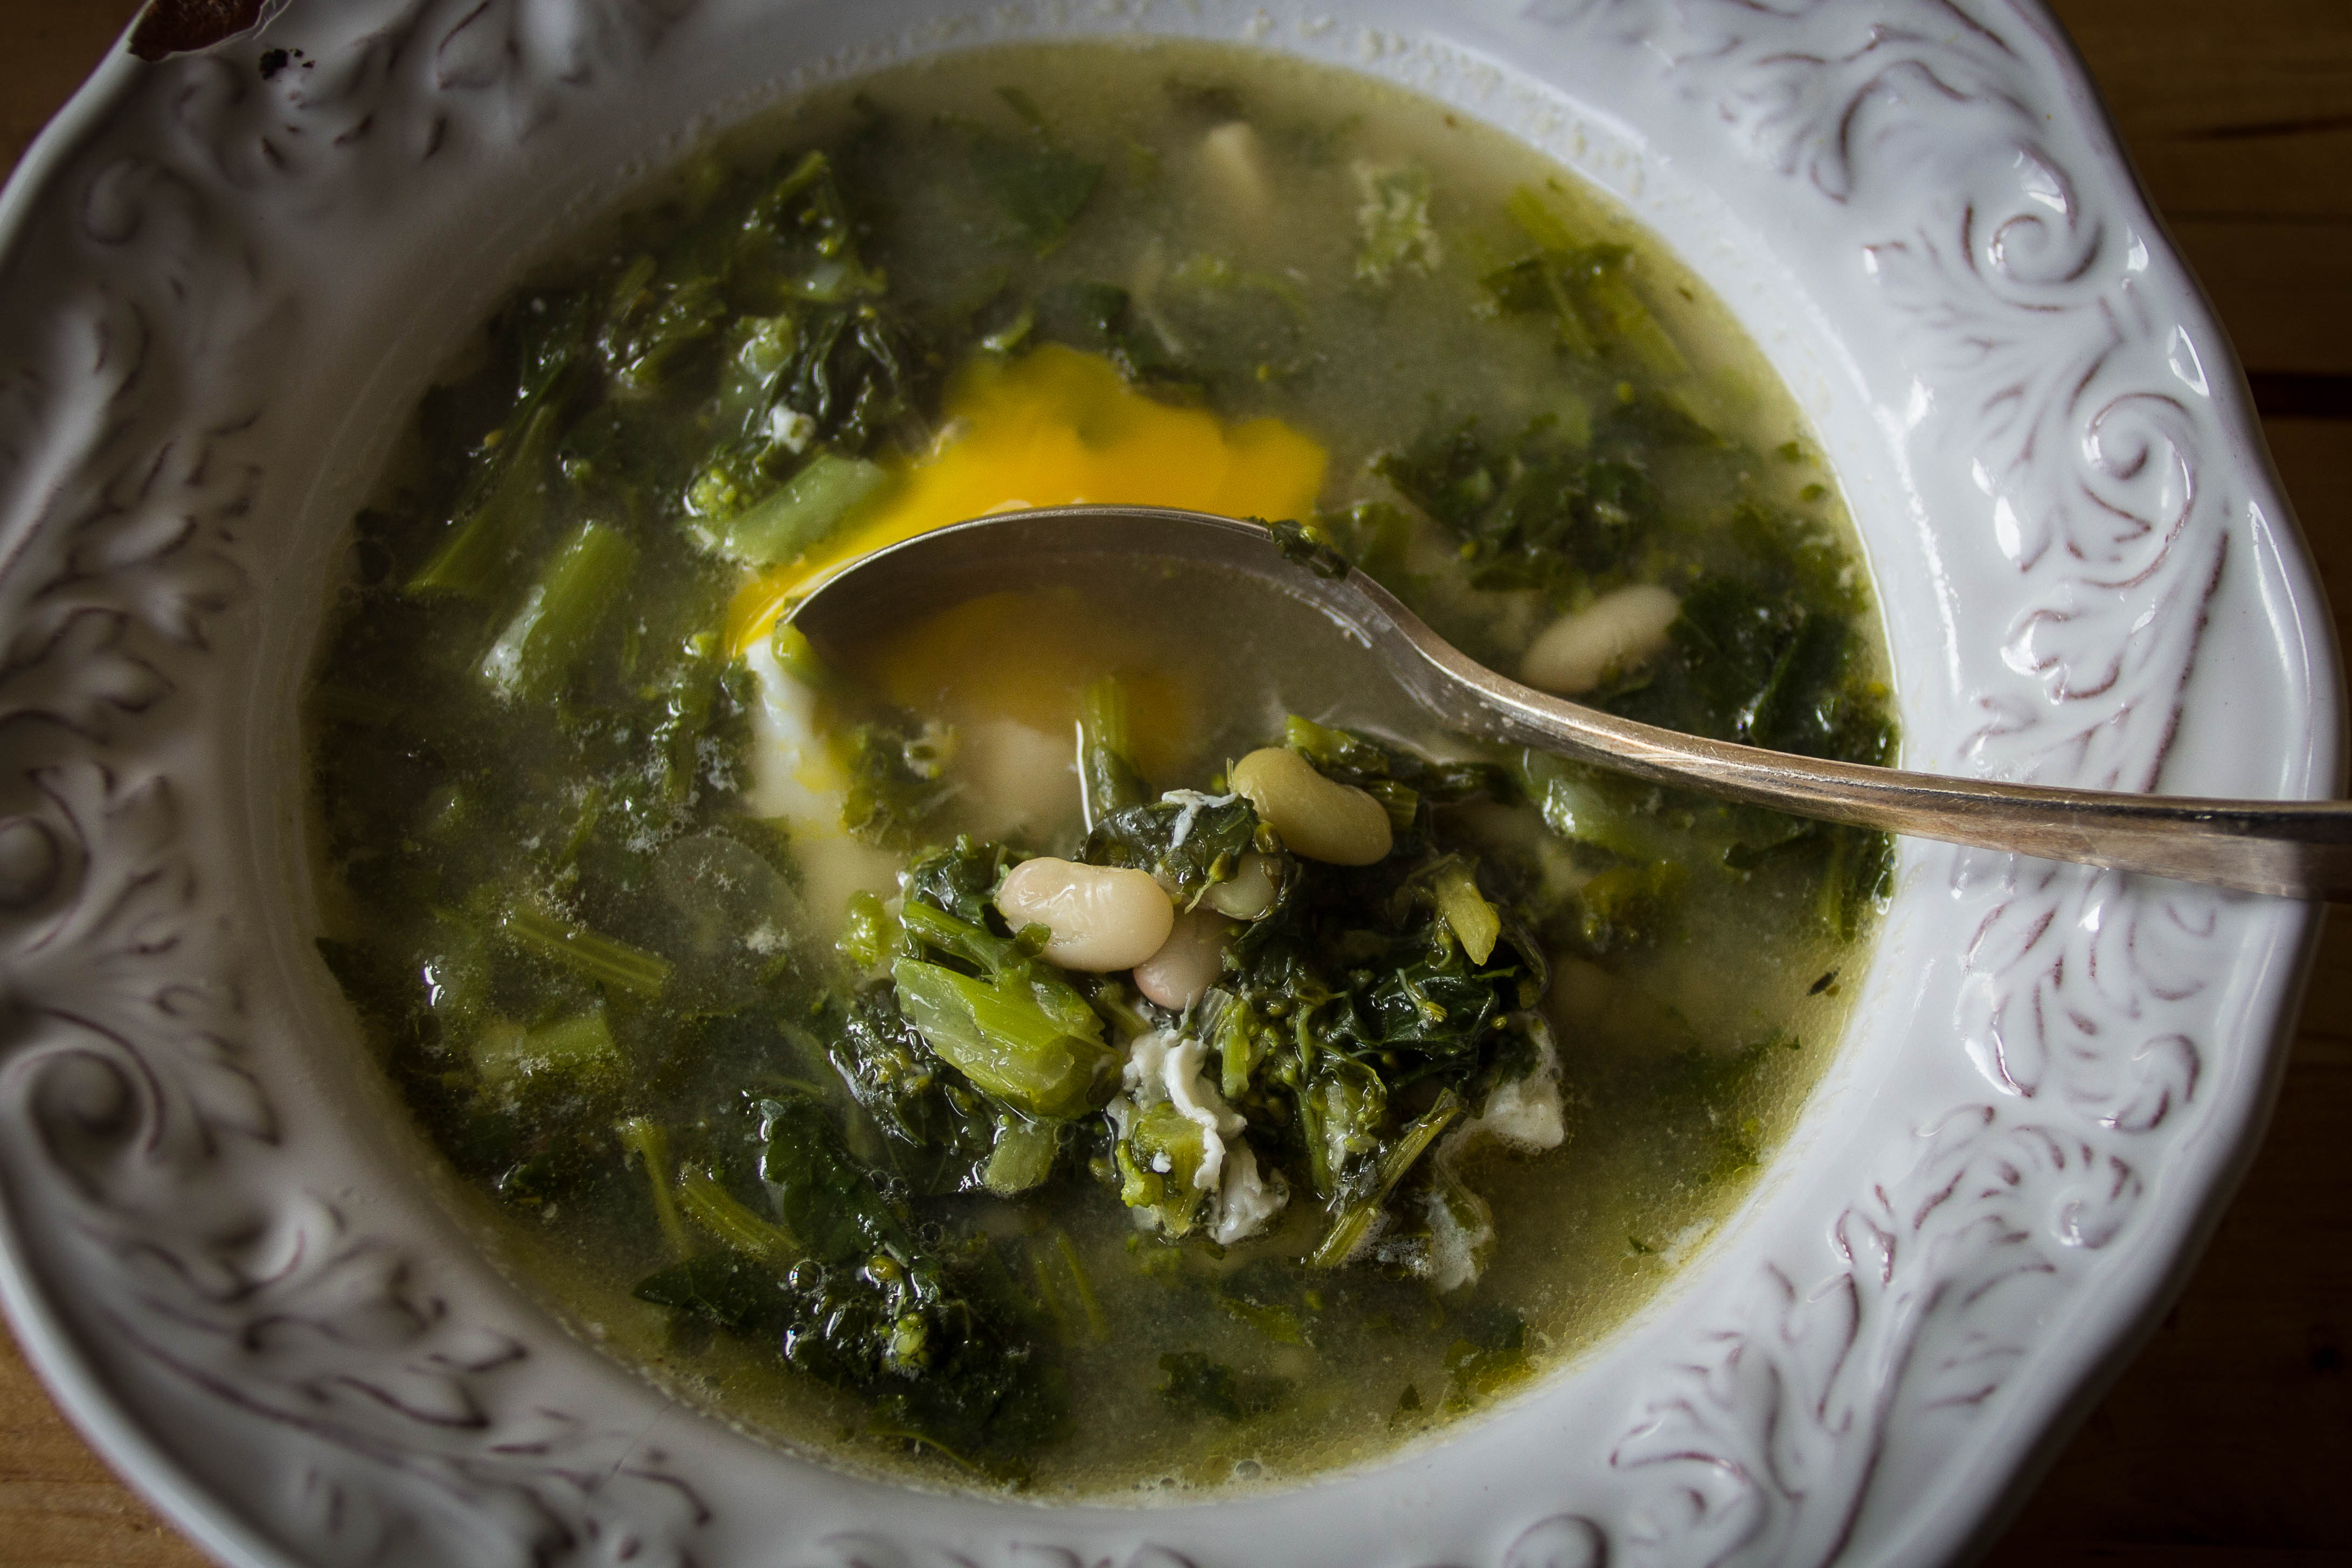 White bean and broccoli rabe soup in a bowl, topped with a poached egg